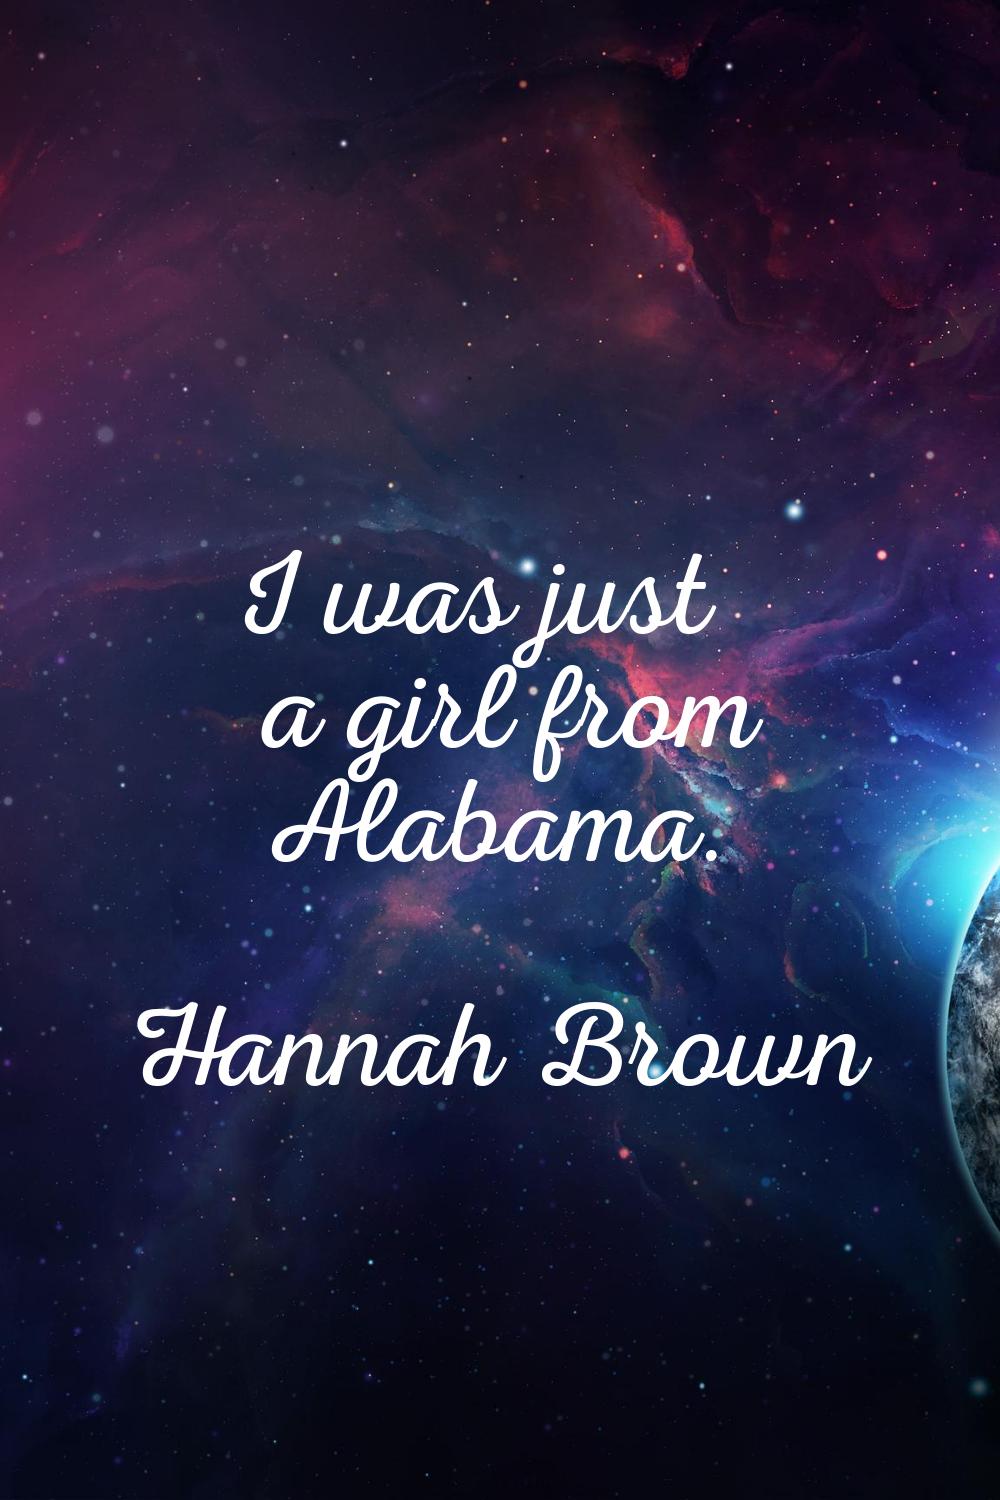 I was just a girl from Alabama.